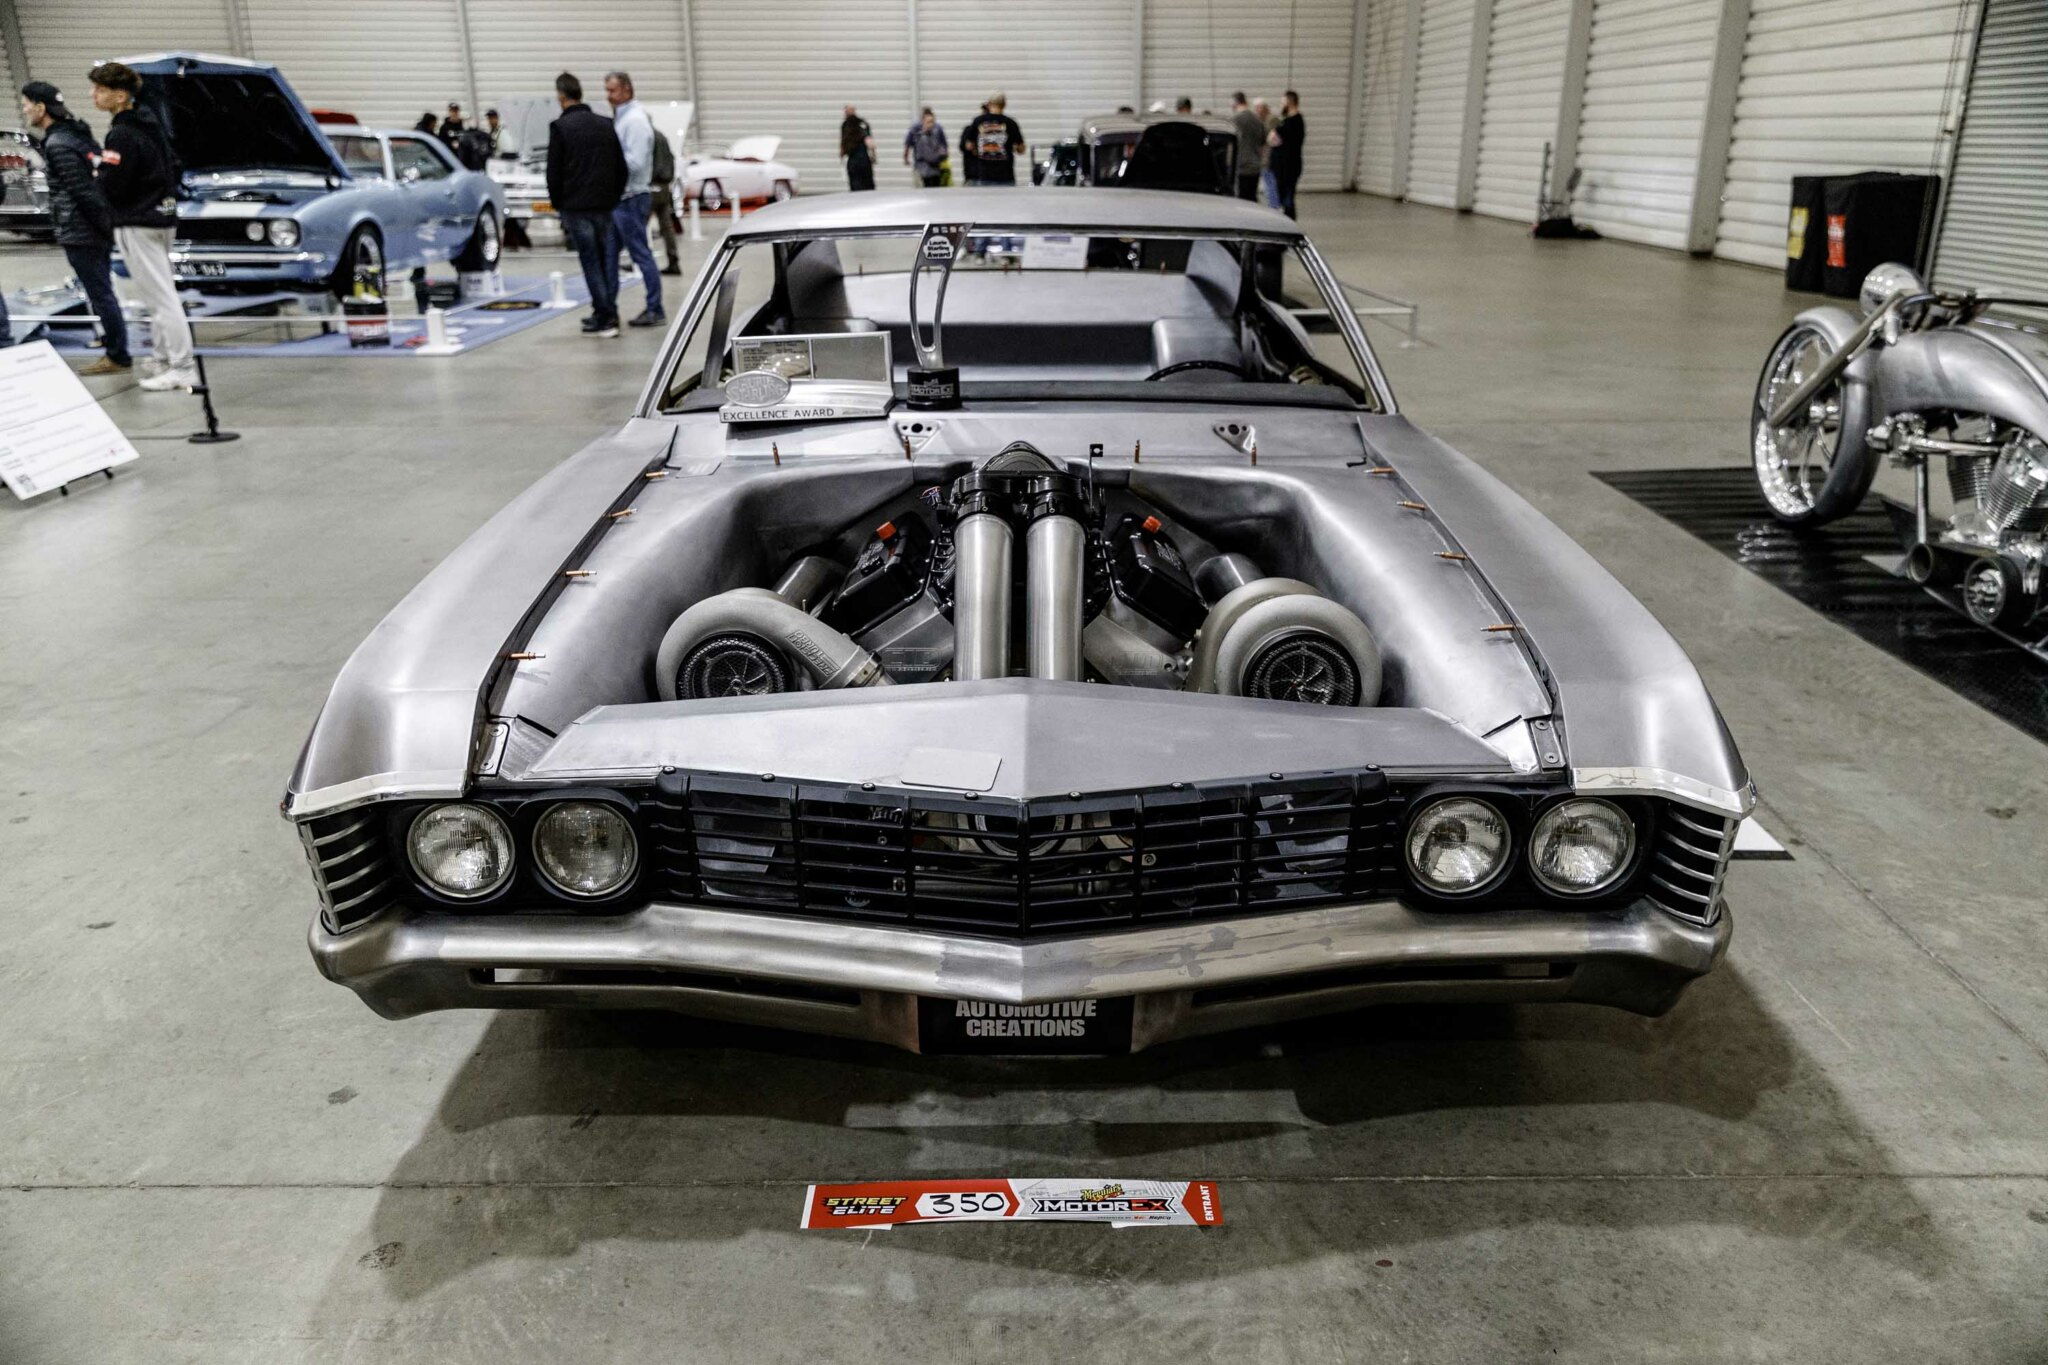 3000hp 1967 Impala project wins the Laurie Starling Engineering Excellence award